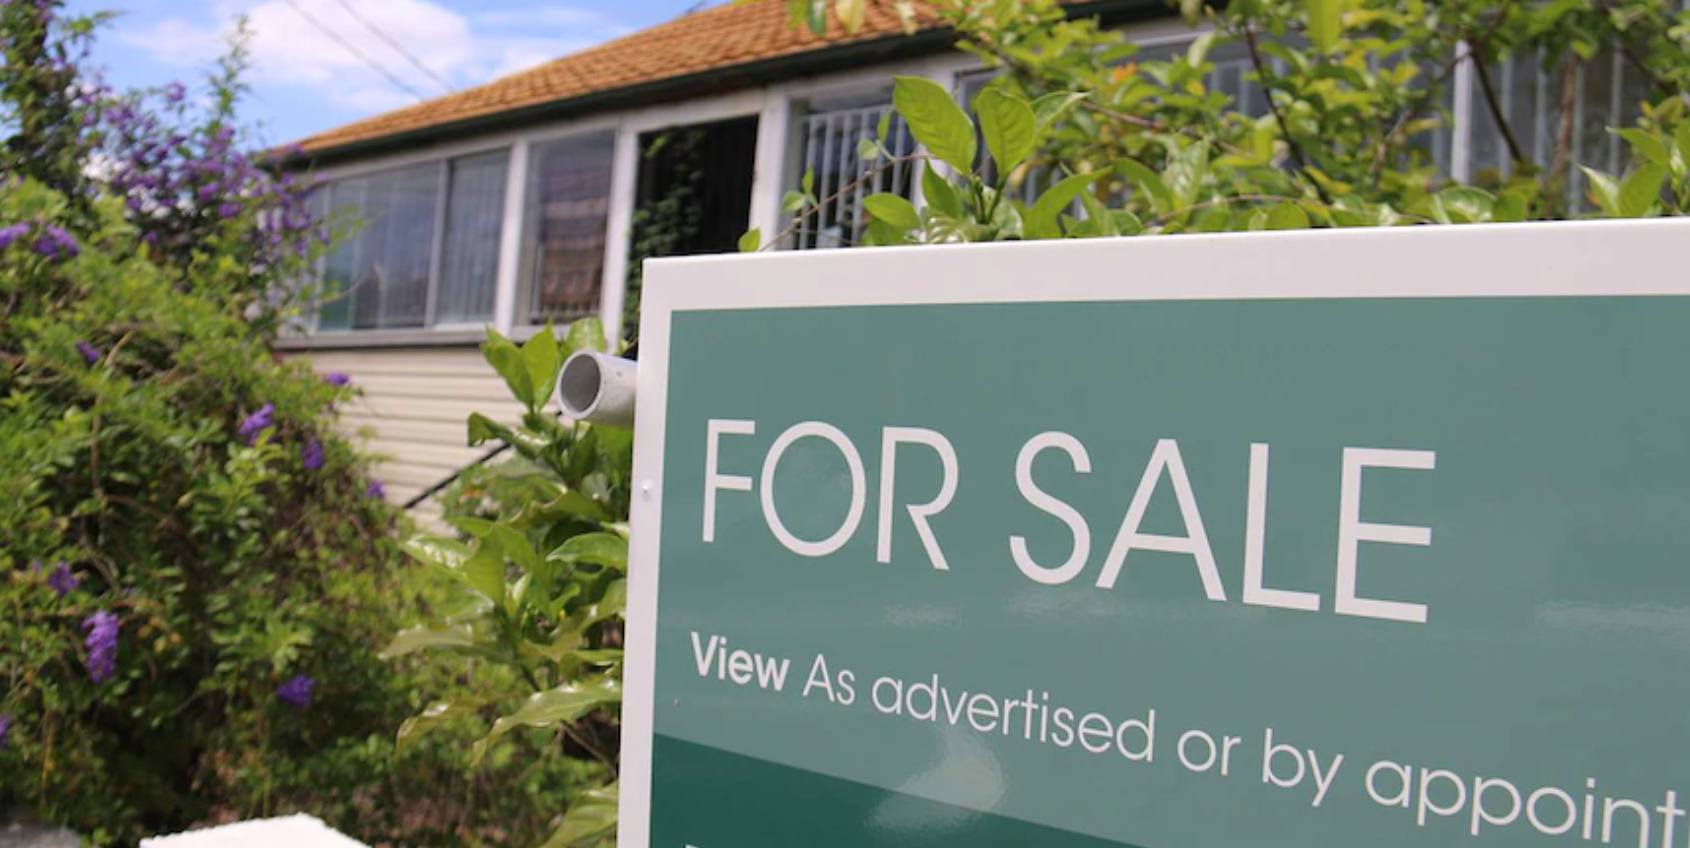 New South Wales & Victorian Property markets are known for being competitive